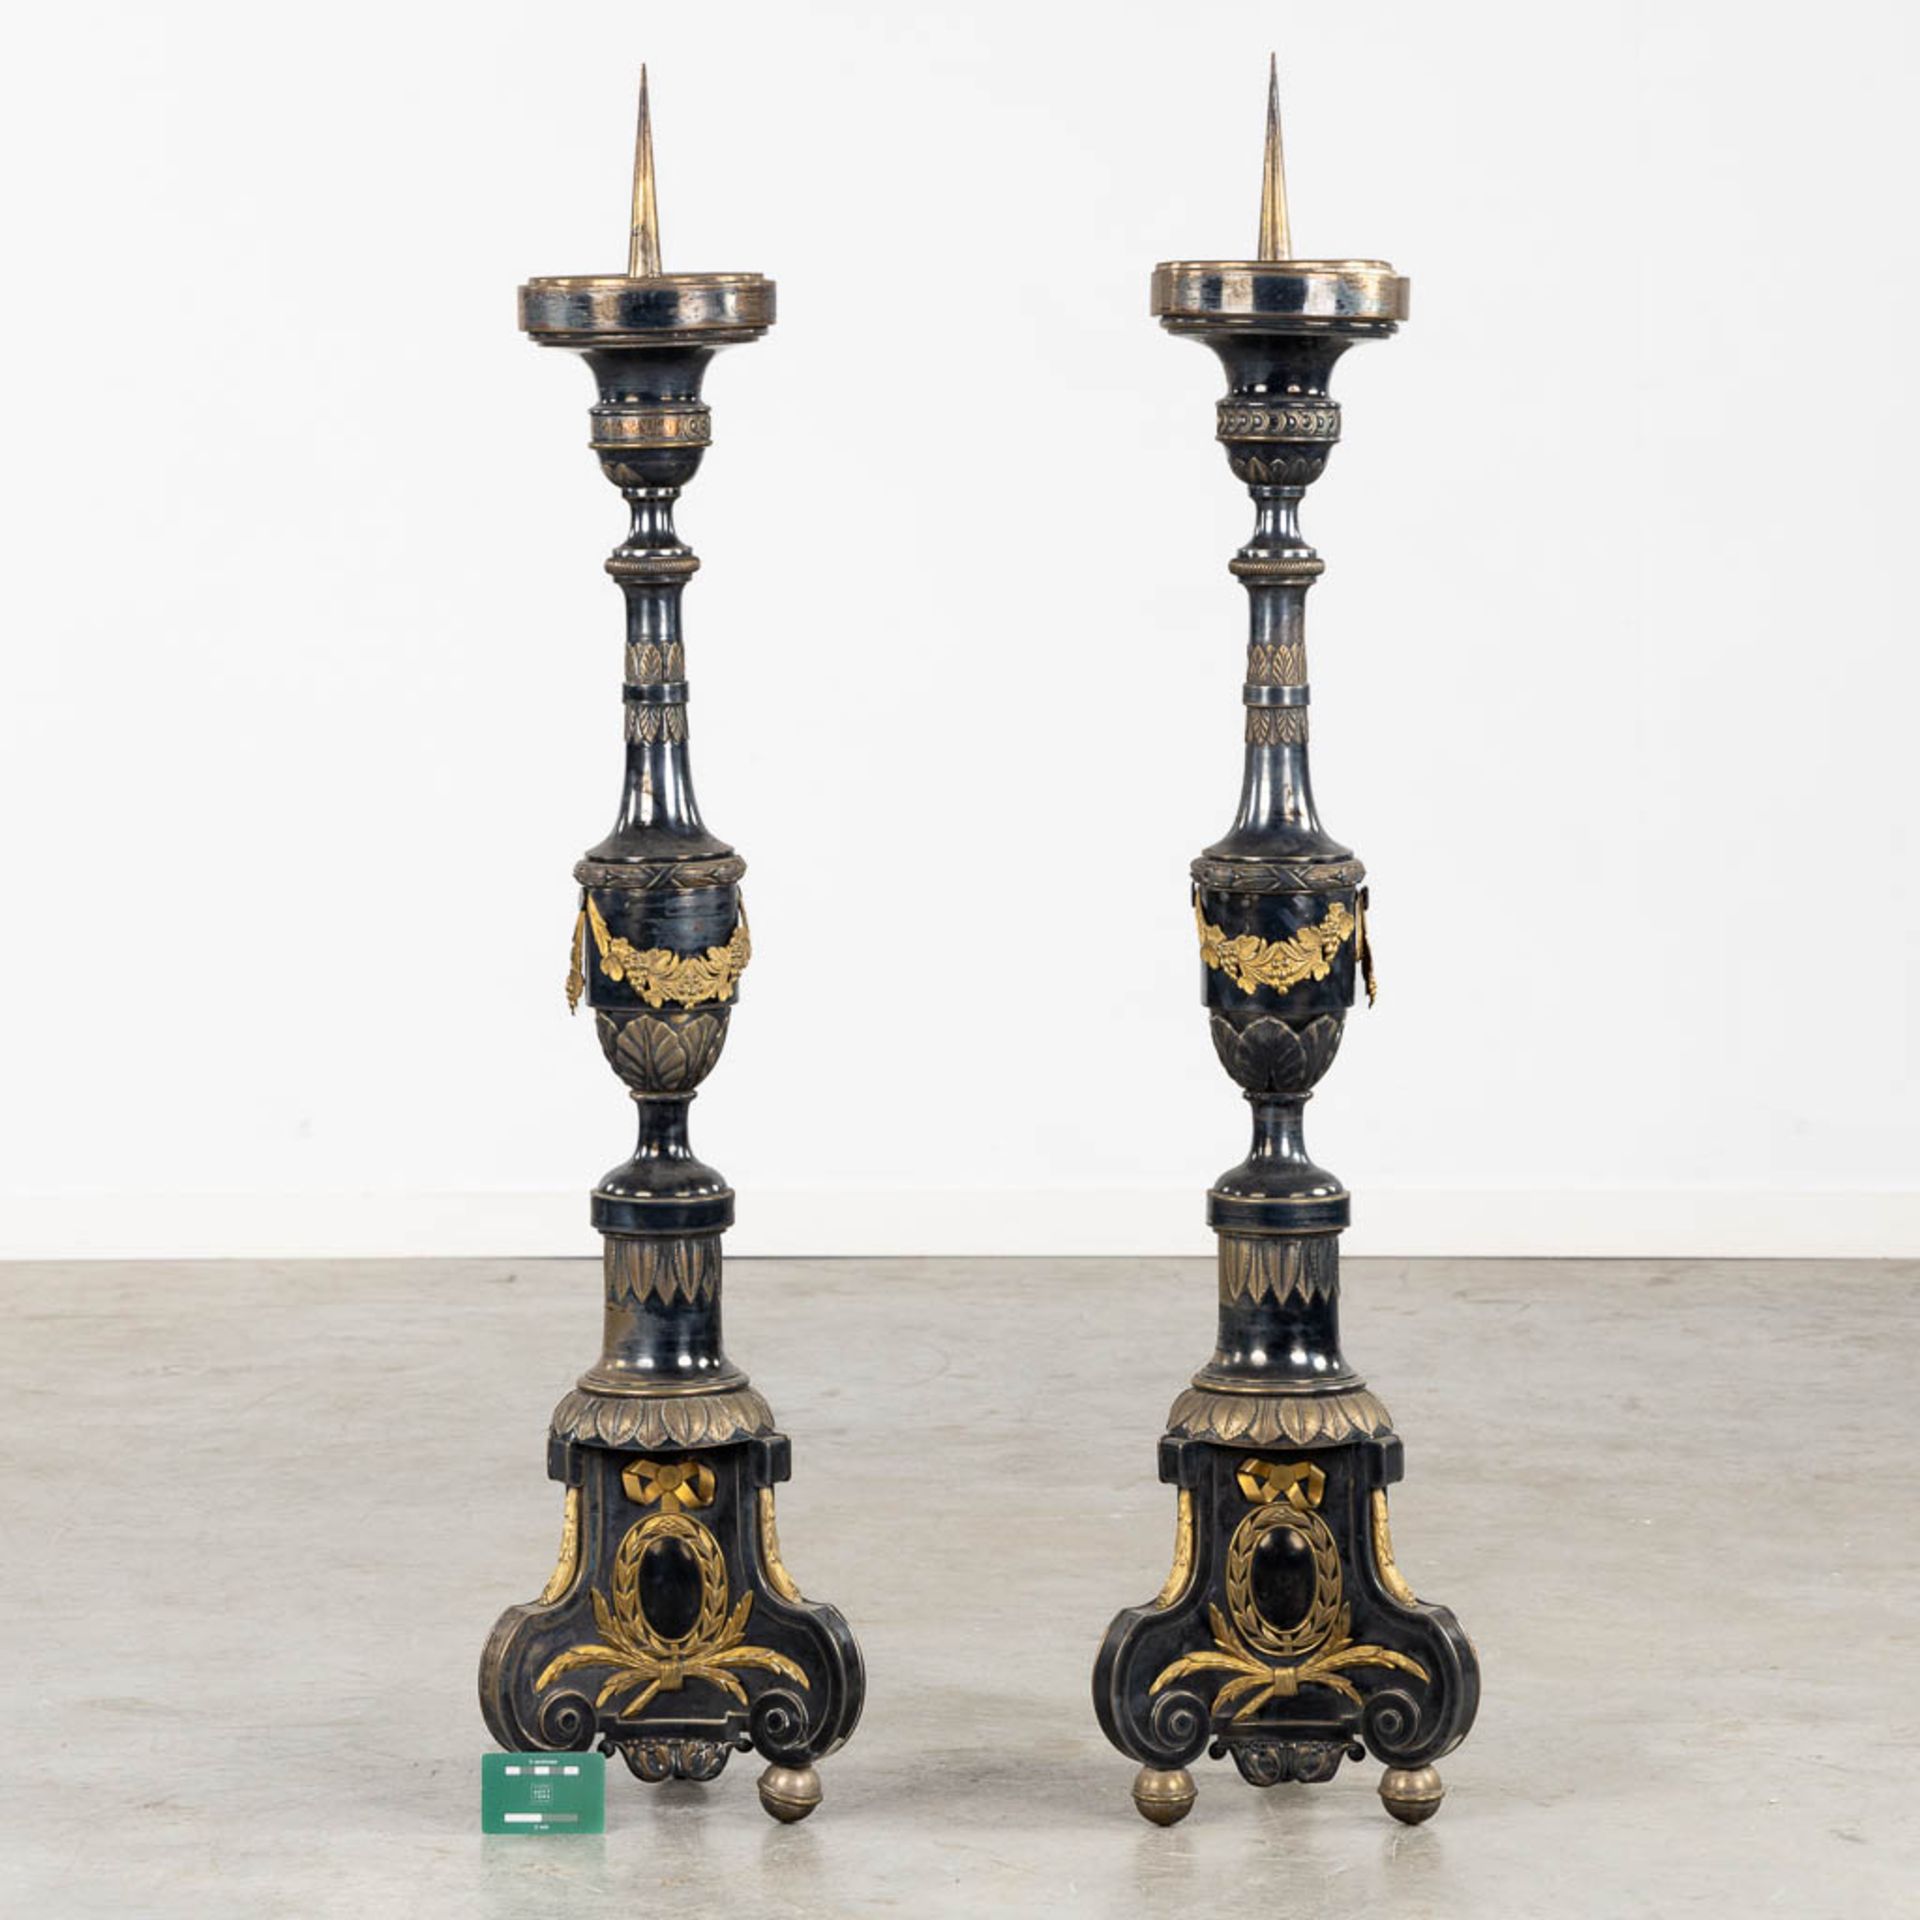 A pair of Church Candlesticks, silver- and gold-plated metal. 19th C. (H:120 cm) - Image 2 of 9